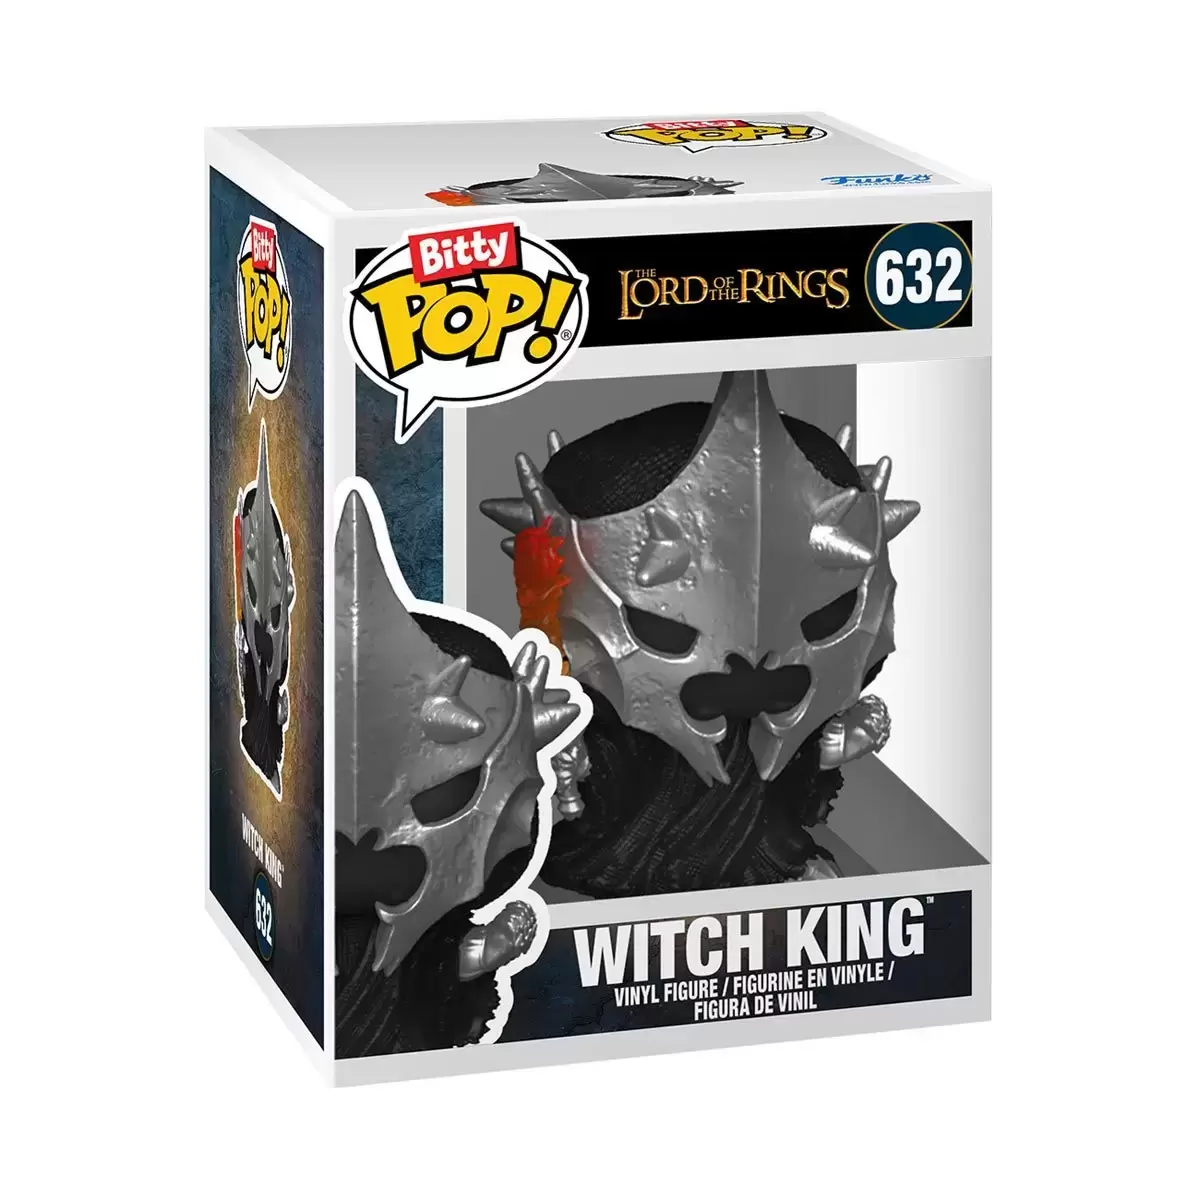 Bitty POP! - Lord of The Rings - Witch King